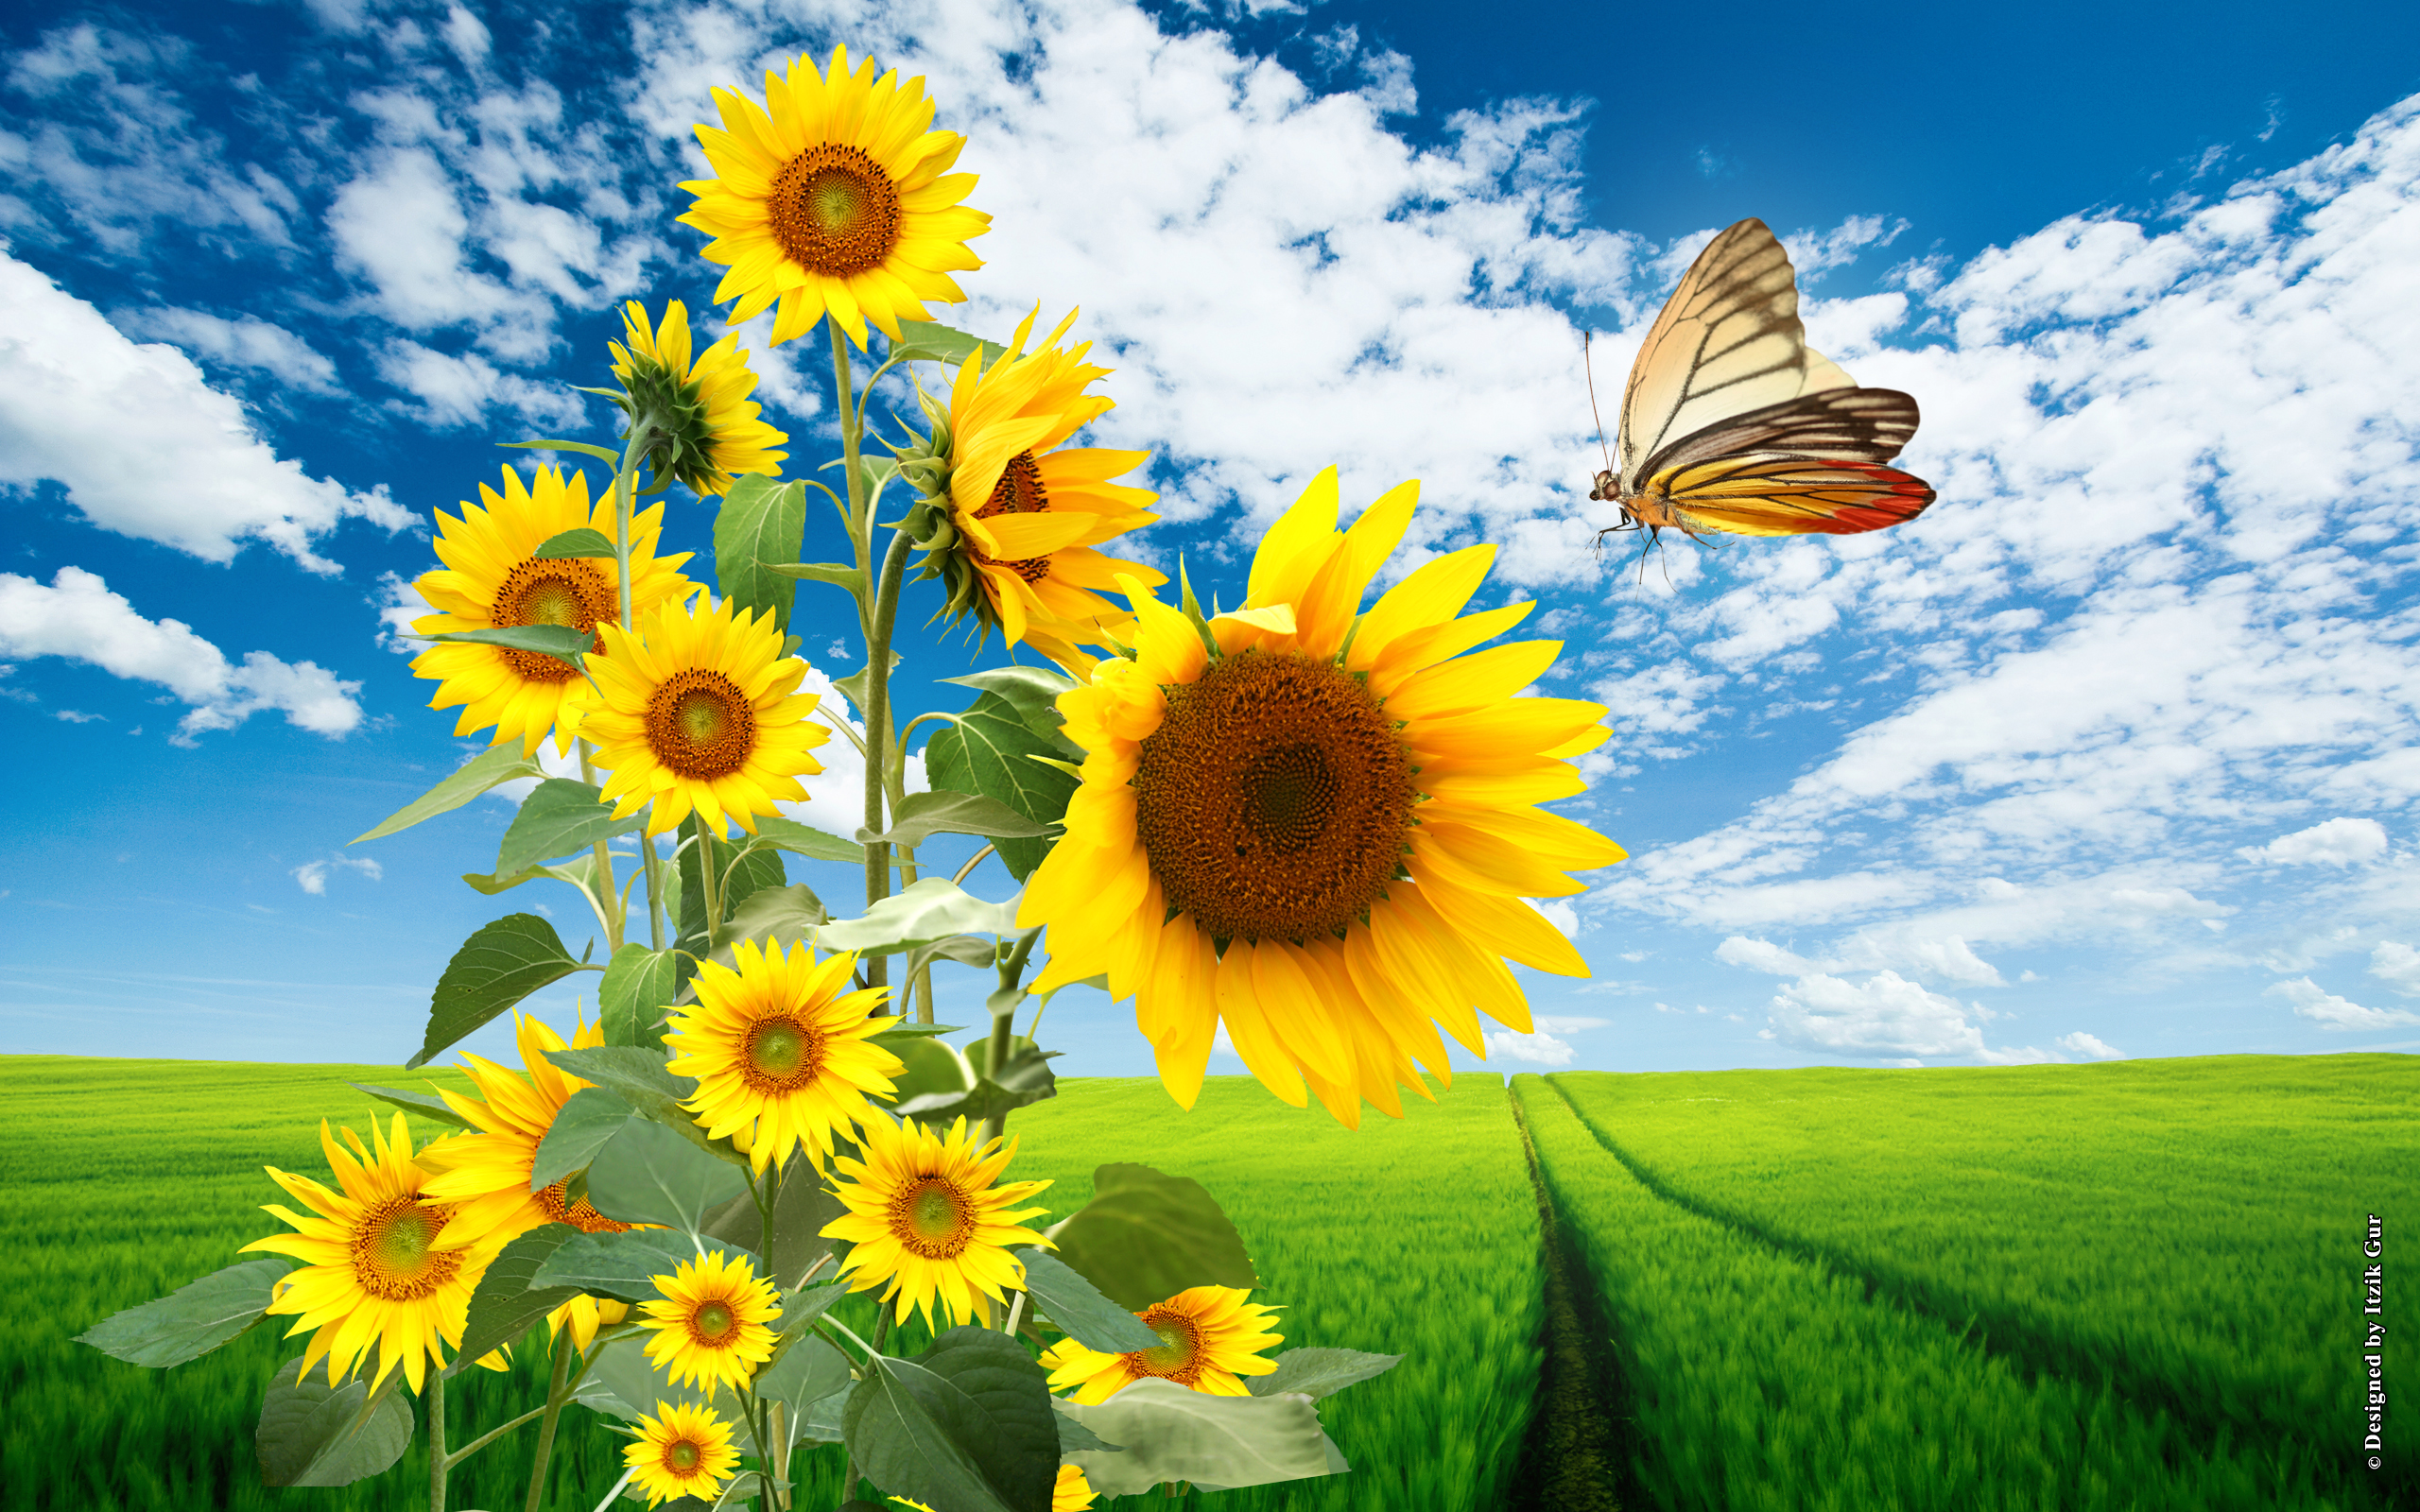 HD Wallpapers 2012 Mother's day beautiful flower - sunflowers in the field